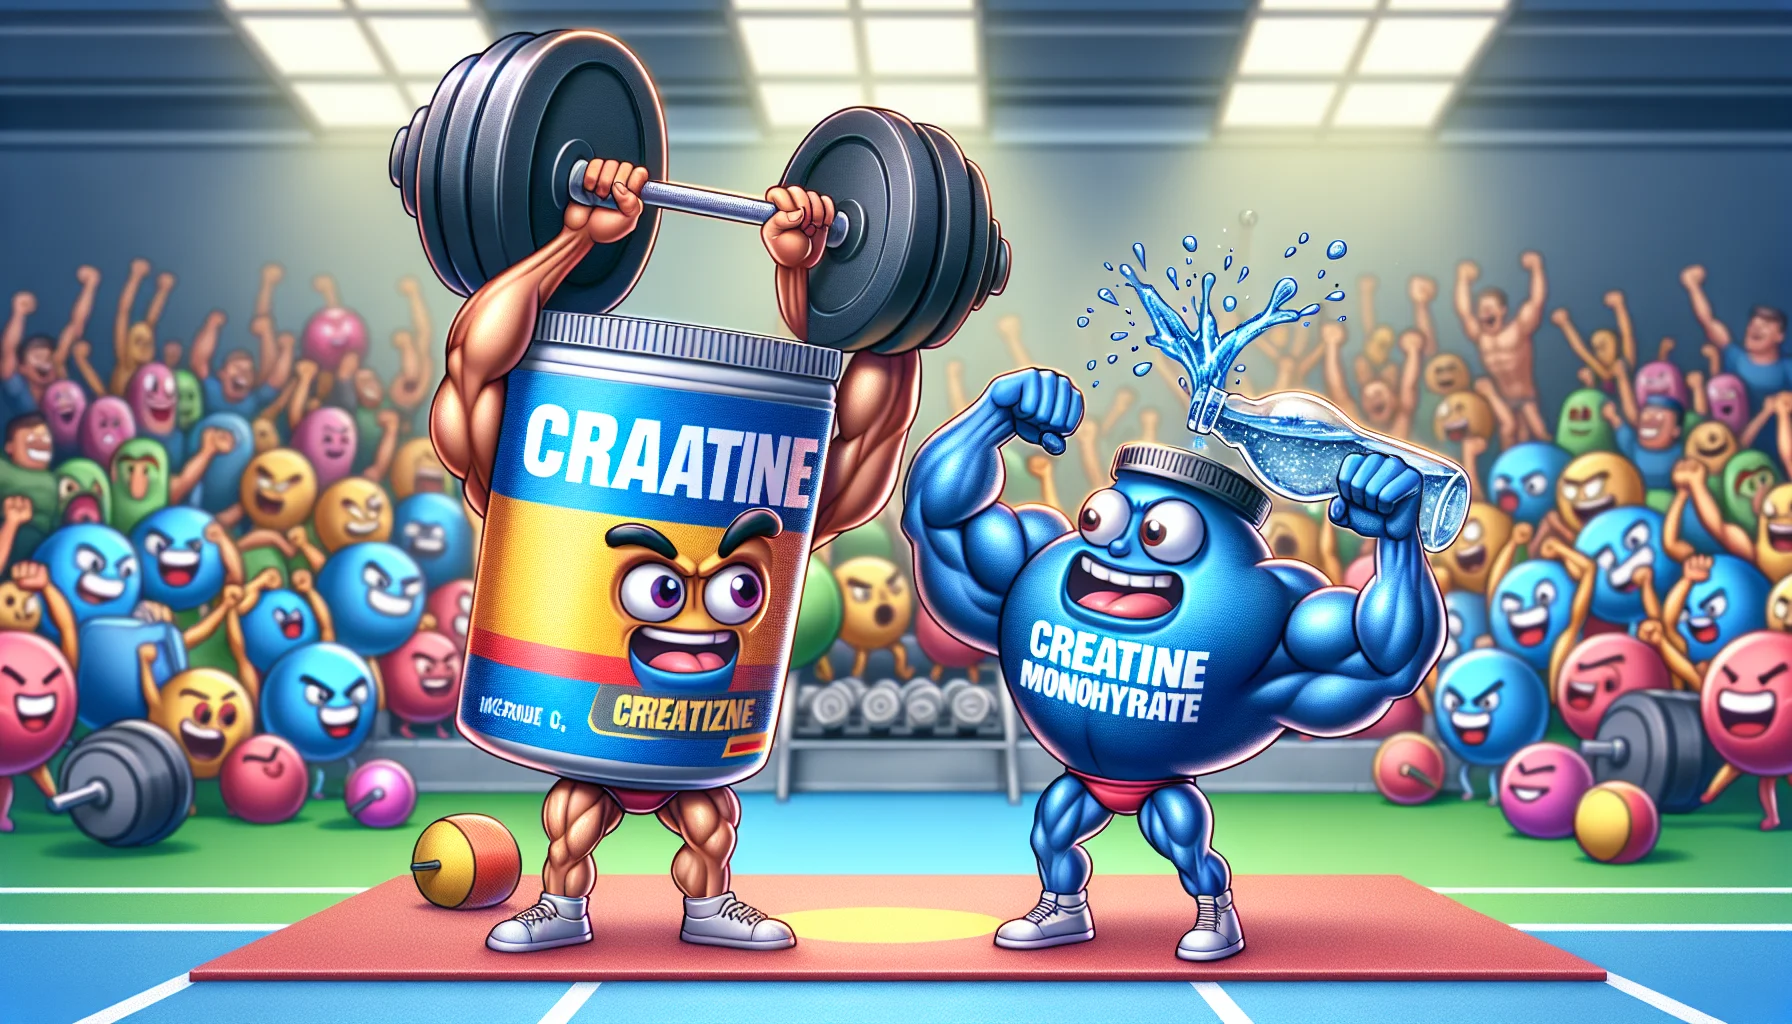 Create a humorous image showcasing micronized creatine and creatine monohydrate as funny cartoon characters in a weight lifting competition. Both characters, being personifications of the supplements, exhibit exaggerated characteristics of their respective properties. Micronized creatine, depicted as a smaller, more agile figure, is energetically lifting a huge dumbbell, showing its quicker absorption feature. On the other hand, the Creatine Monohydrate, a larger, steadier figure, confidently shakes a bottle filled with water, demonstrating its efficient dissolution. The background is depicted as a vibrant gym scene filled with cheering sport supplement containers, thereby promoting a positive image of supplement use for sports.